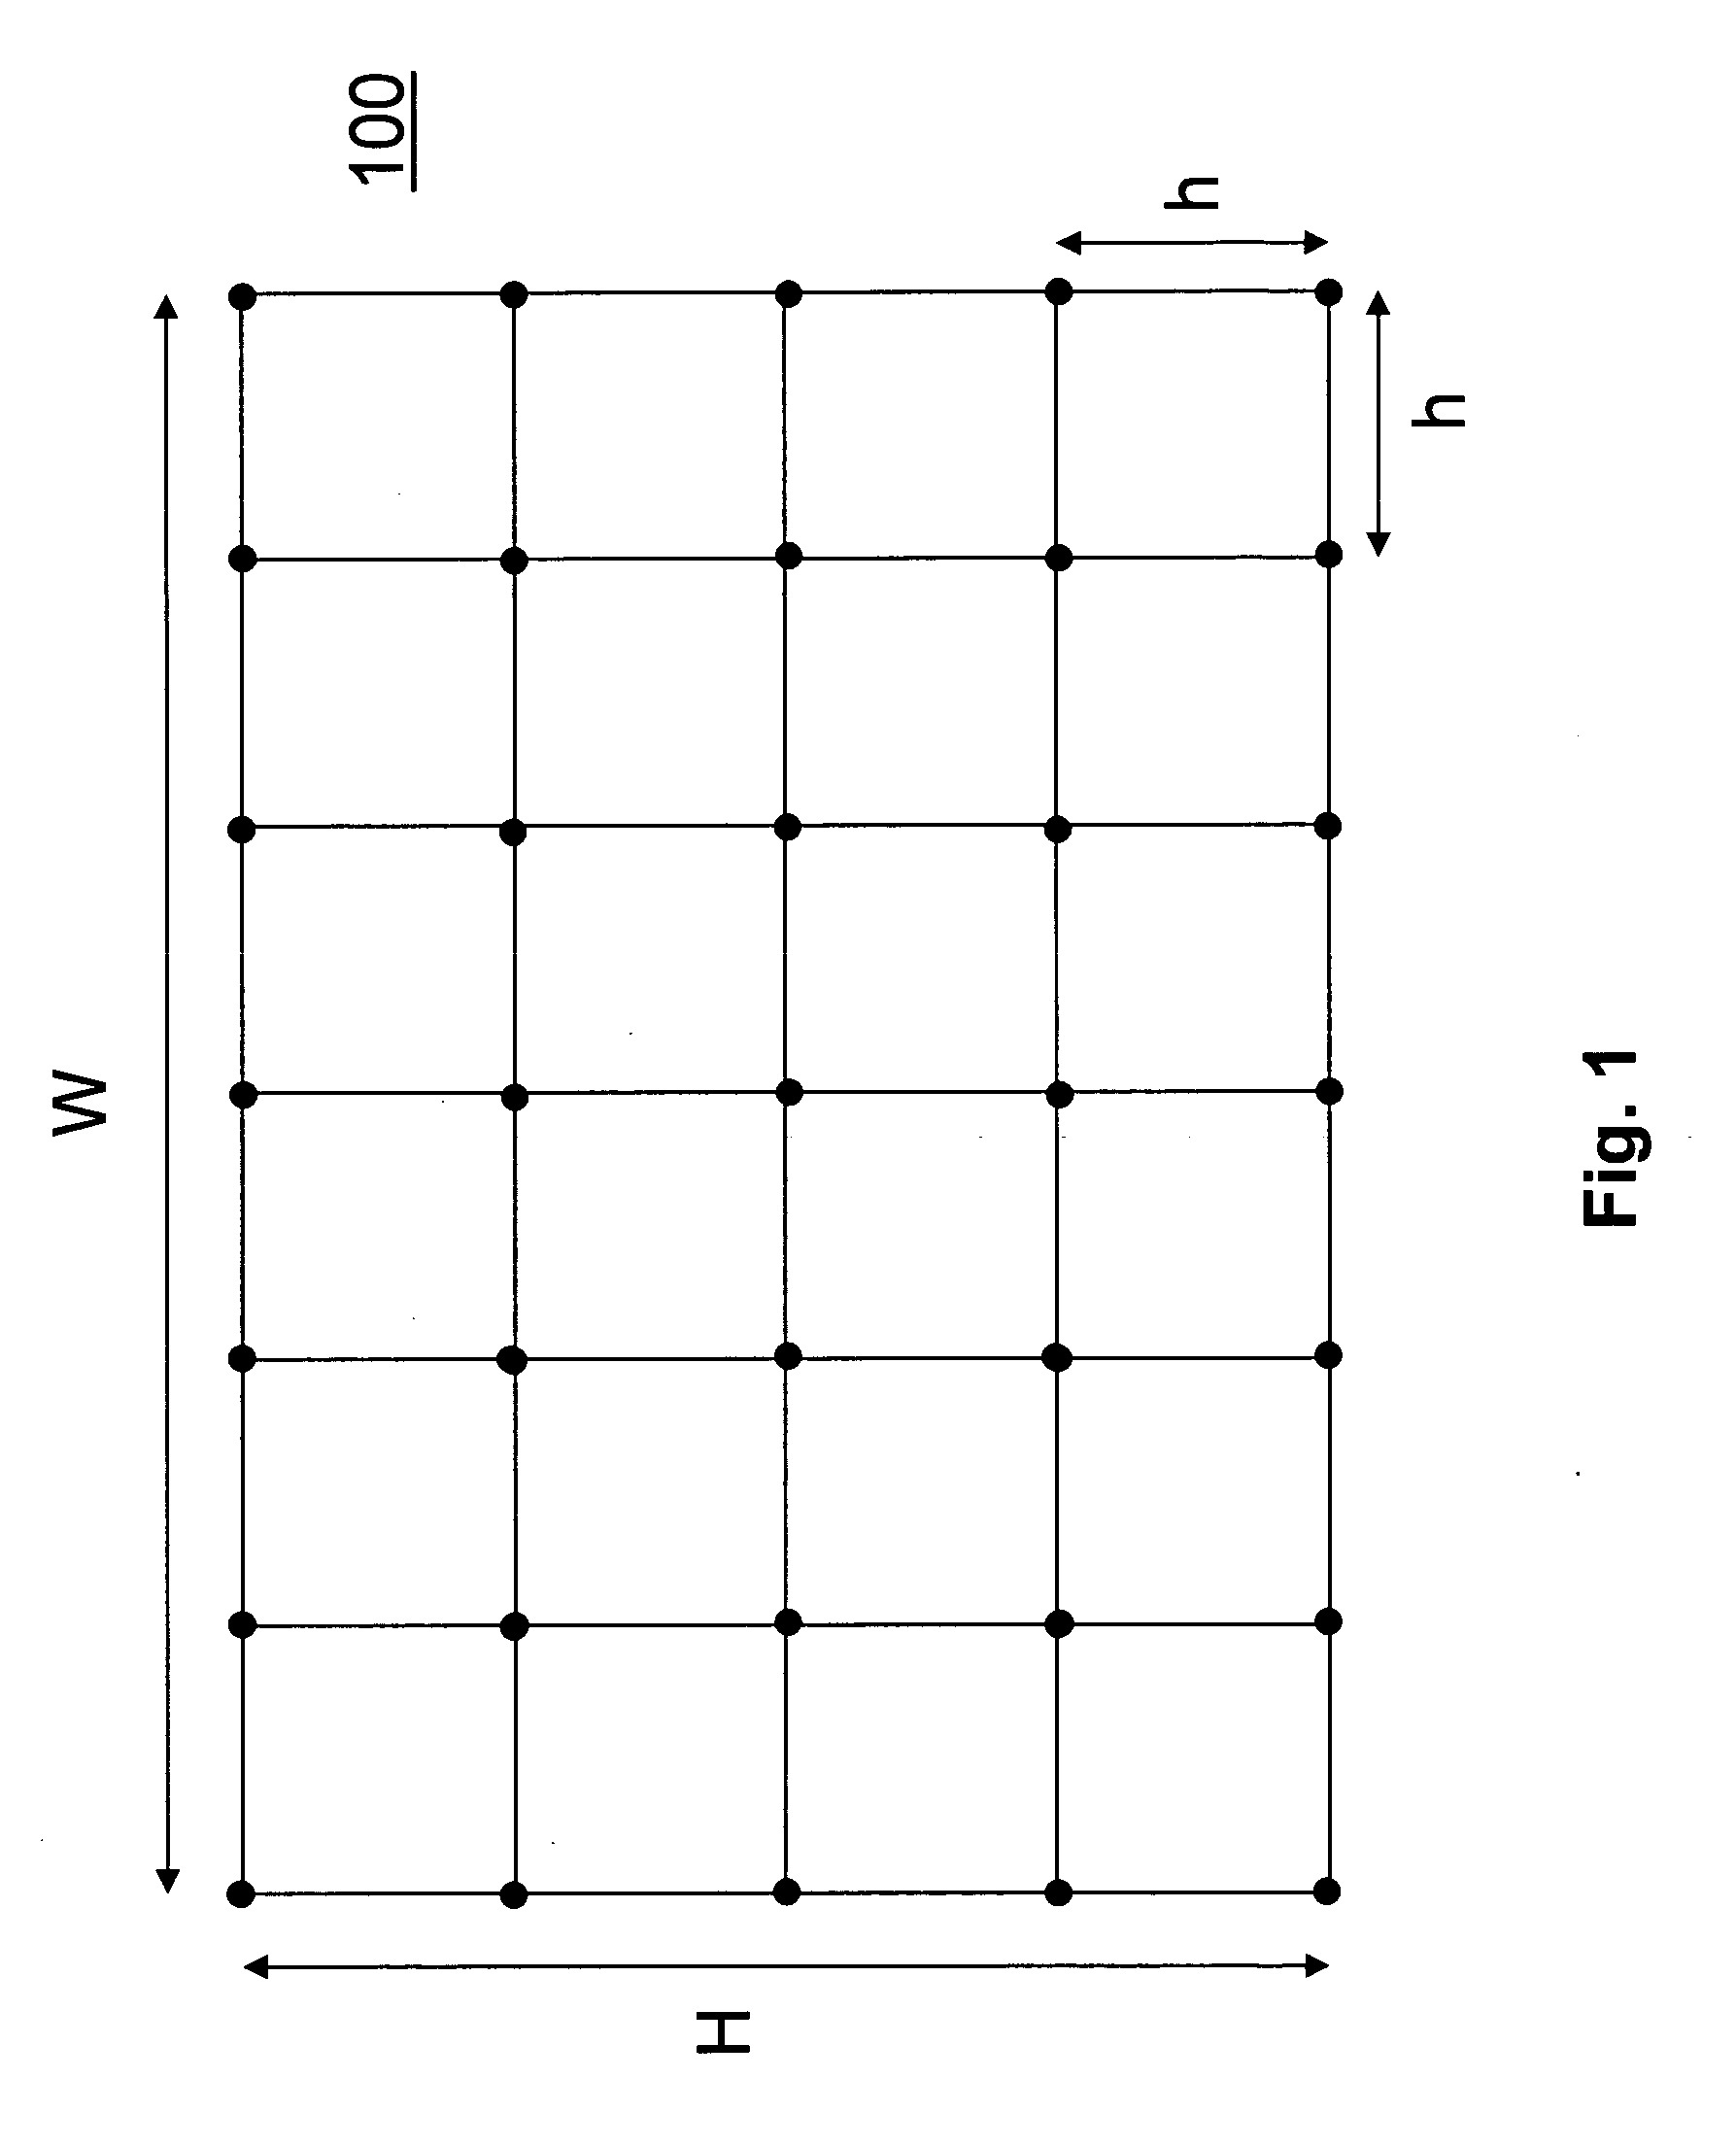 Method of generating surface defined by boundary of three-dimensional point cloud